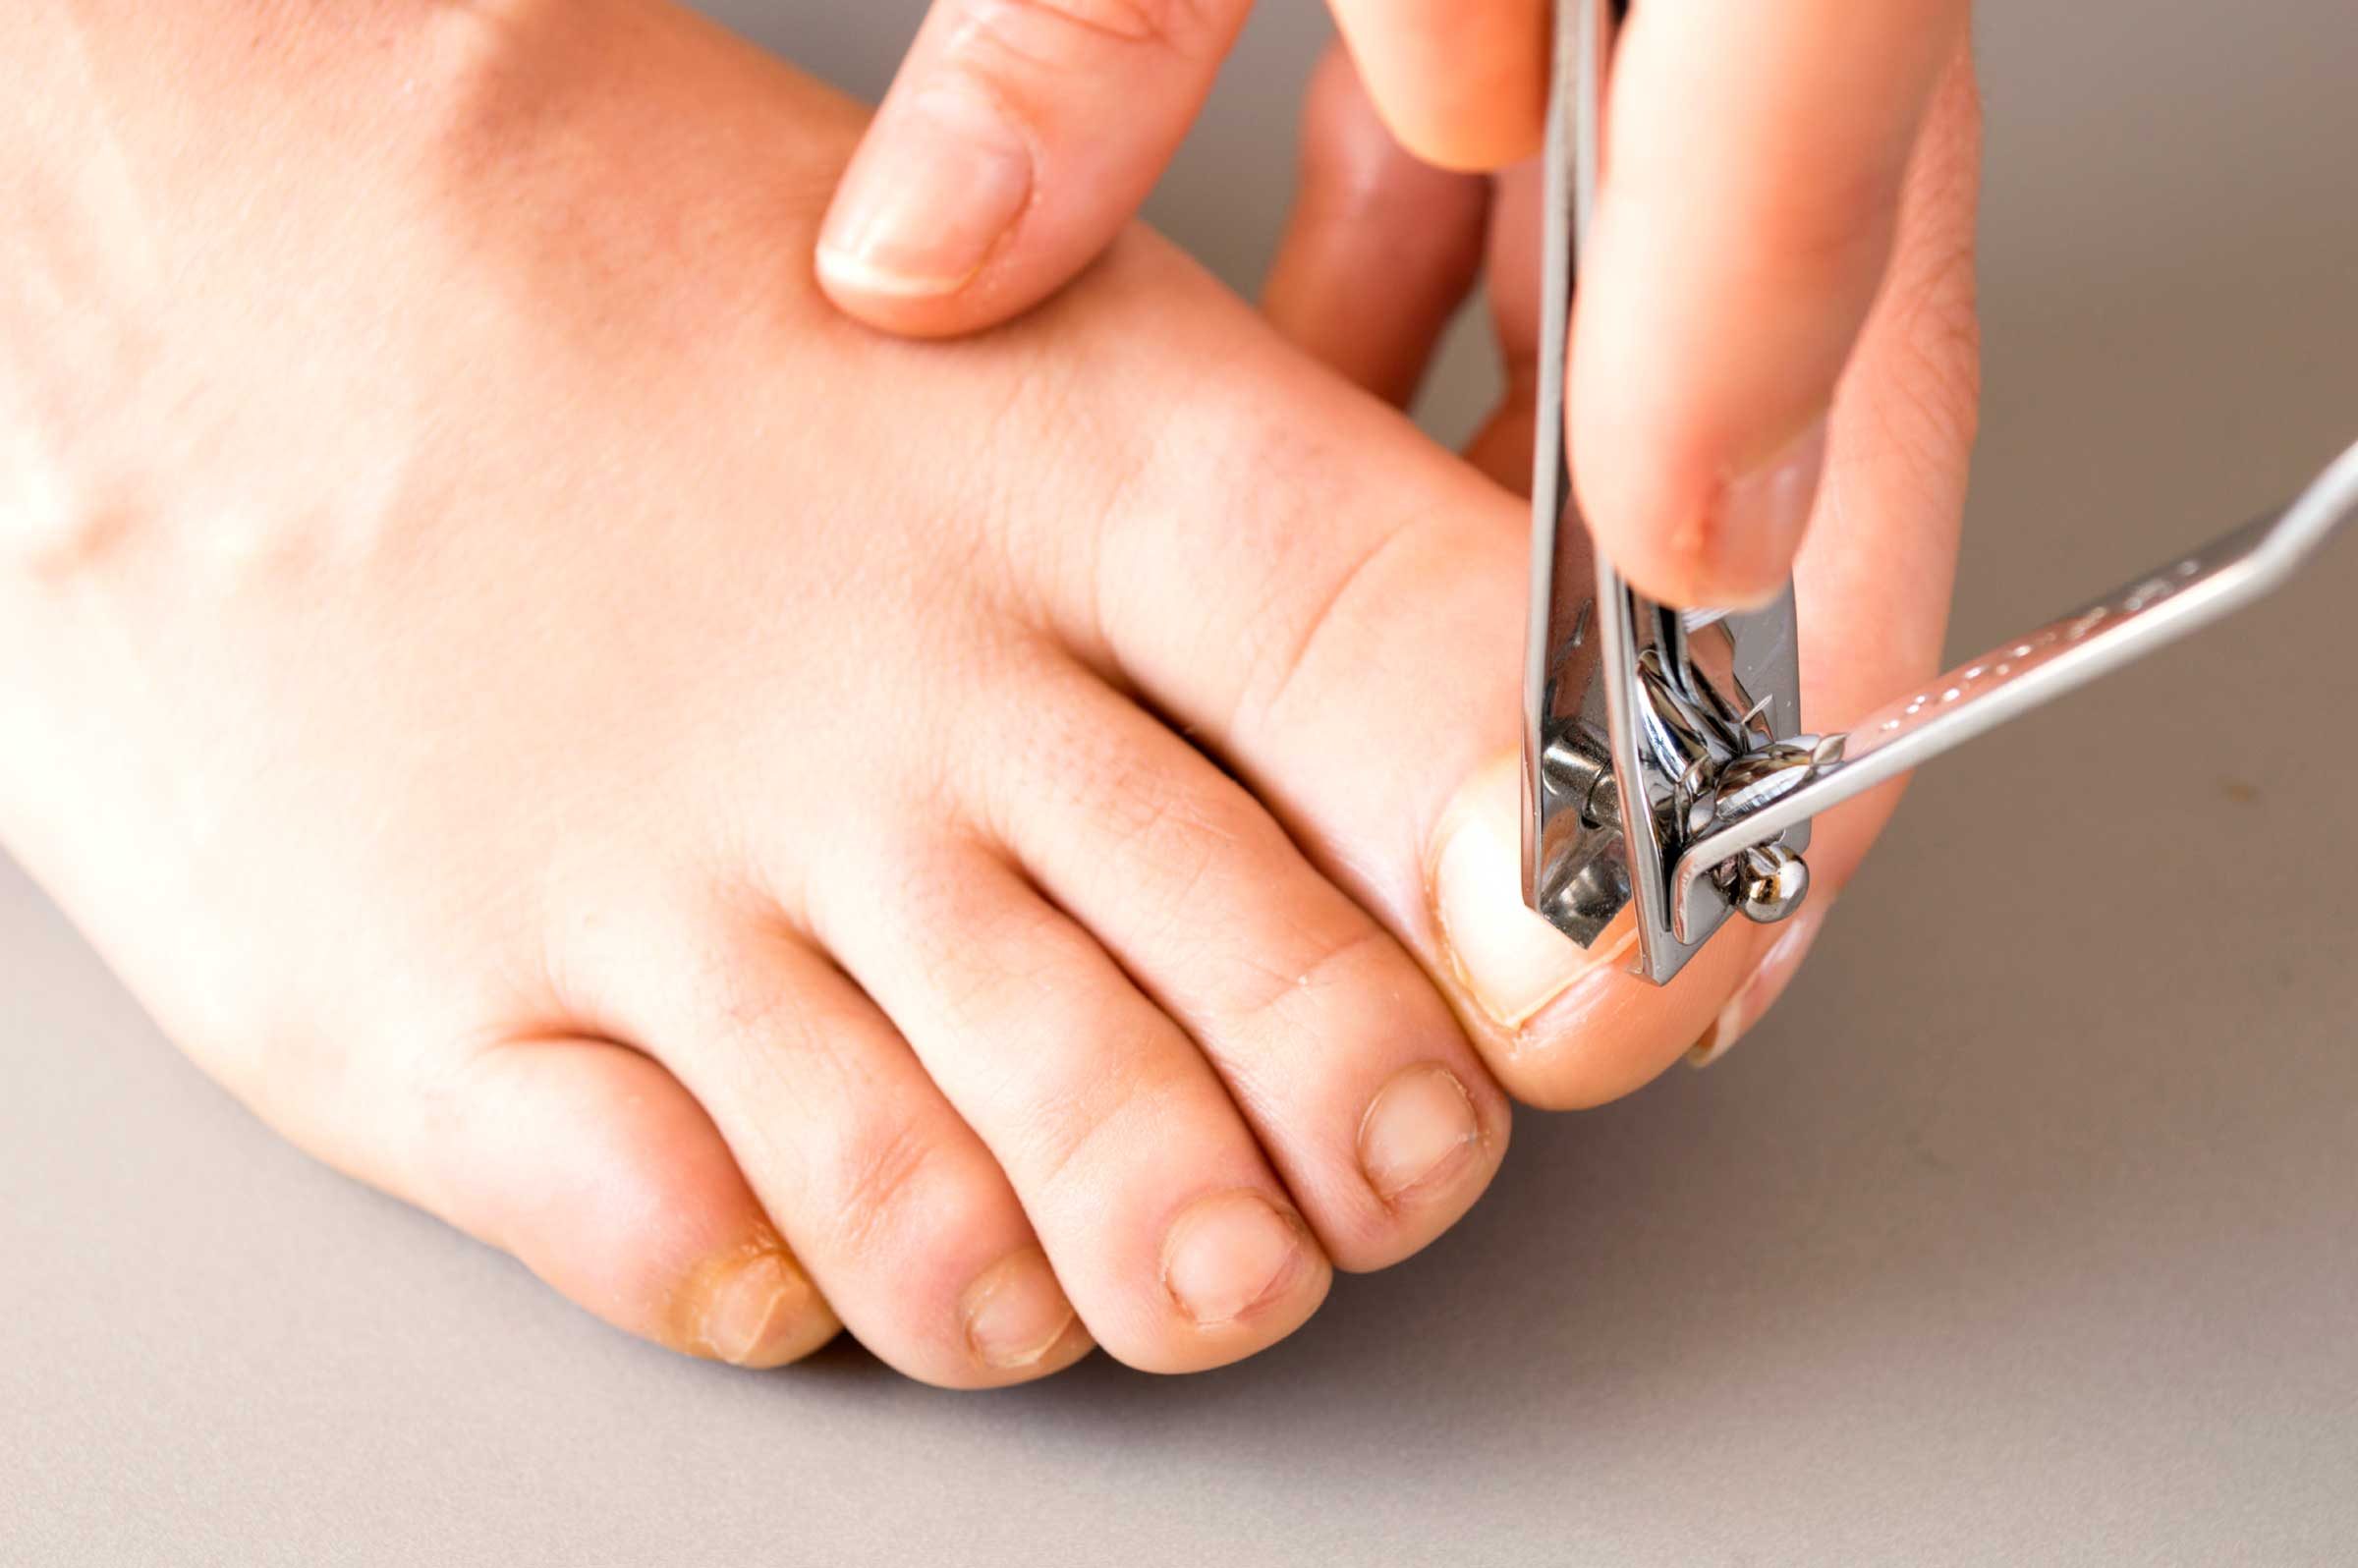 Why is proper foot care essential for diabetics?